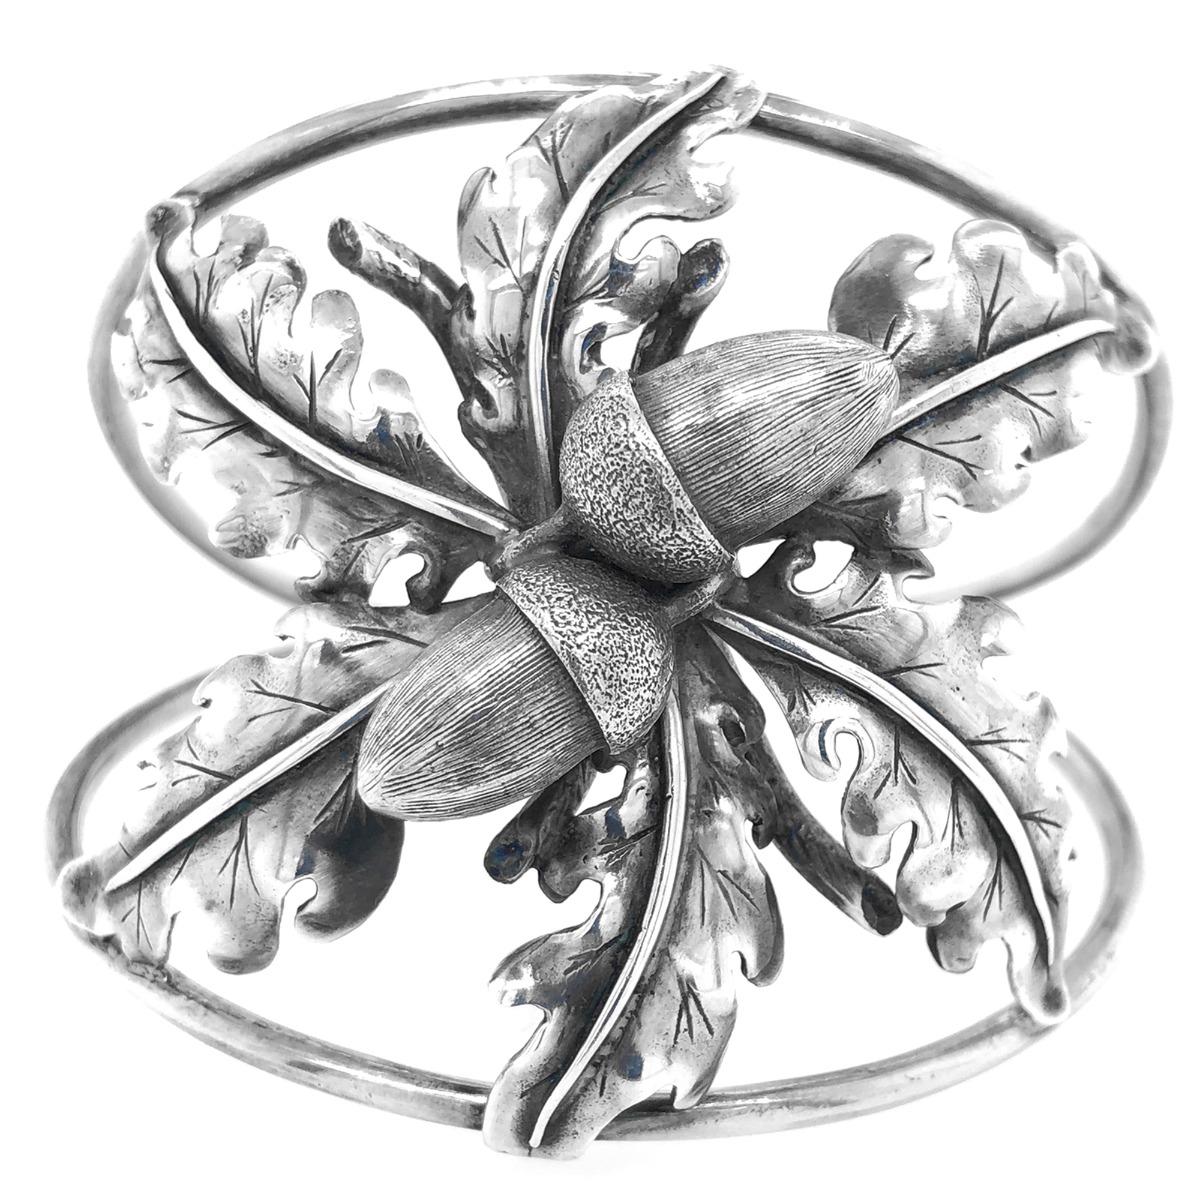 Metal: Sterling  Silver
Hallmark: M. Buccellati Italy
Place of Origin: Italy
Weight: 46.2 gms
Width: 40 mm
Wrist: 2 inches
Item No: 525